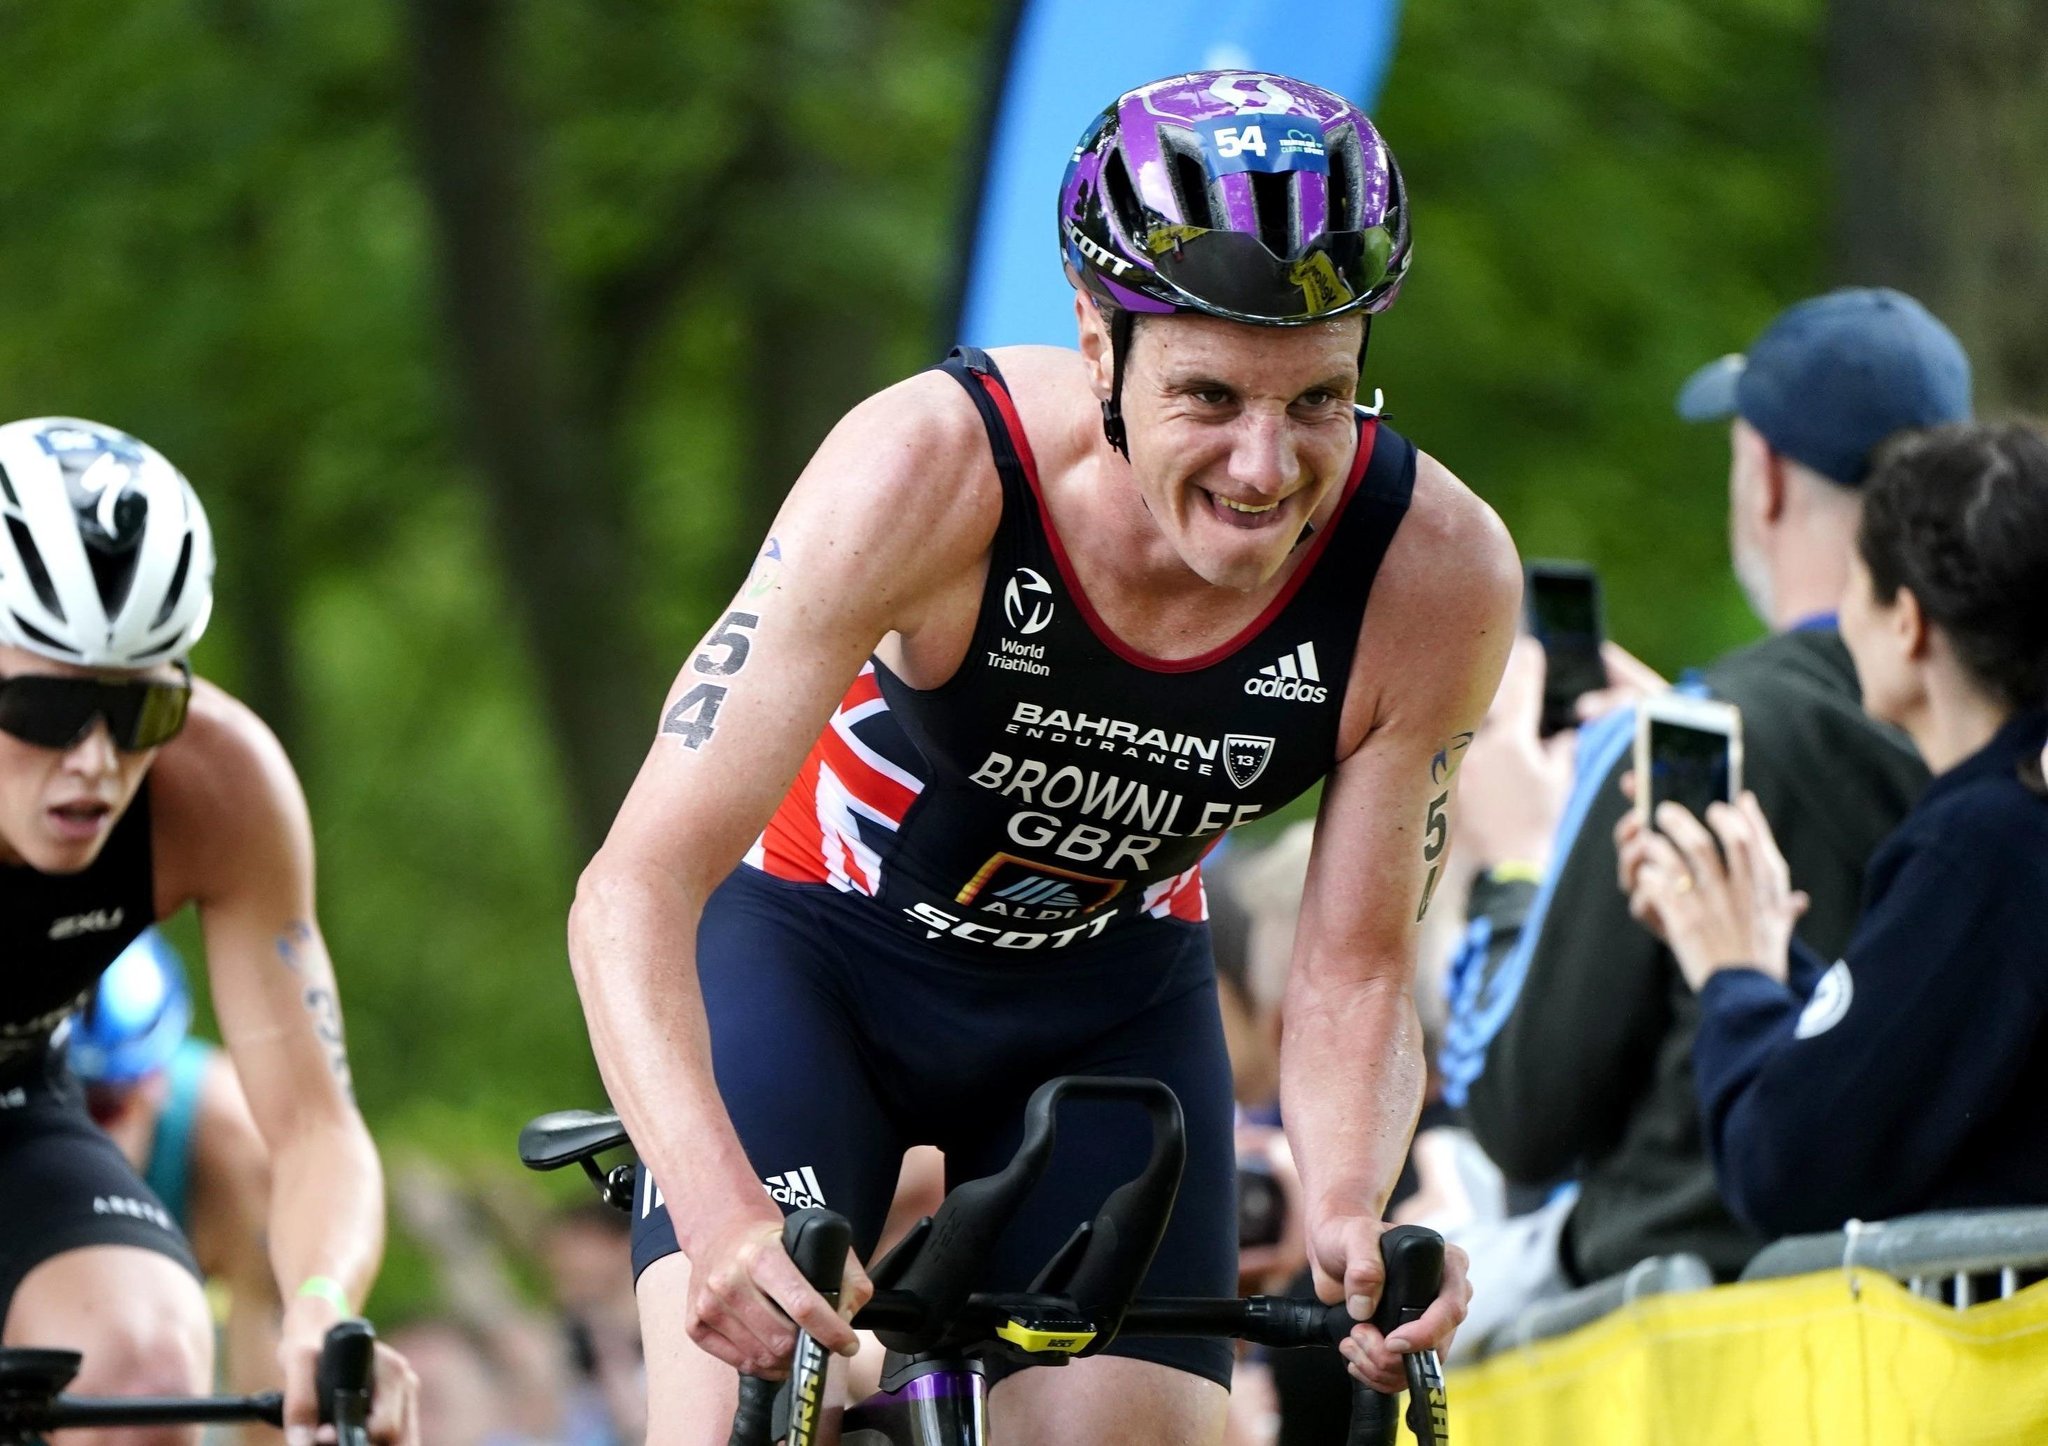 Alistair Brownlee S Olympic Omission Confirmed As Alex Yee Gets Team Gb S Last Spot For Tokyo Yorkshire Post